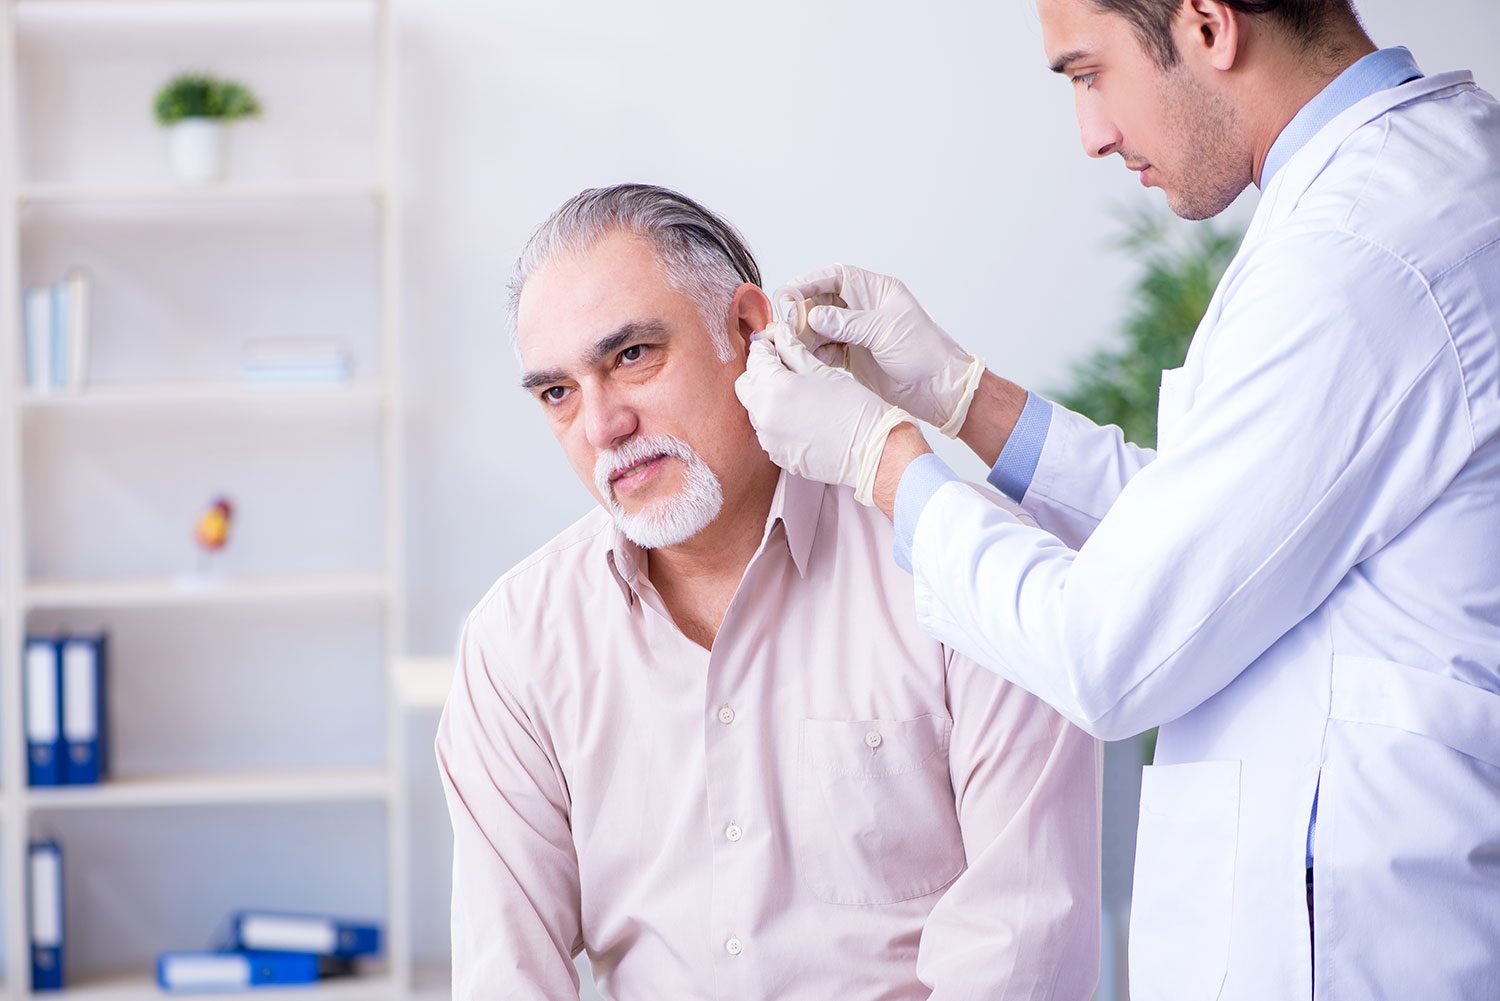 Otolaryngologist fitting a male patient with hearing aids